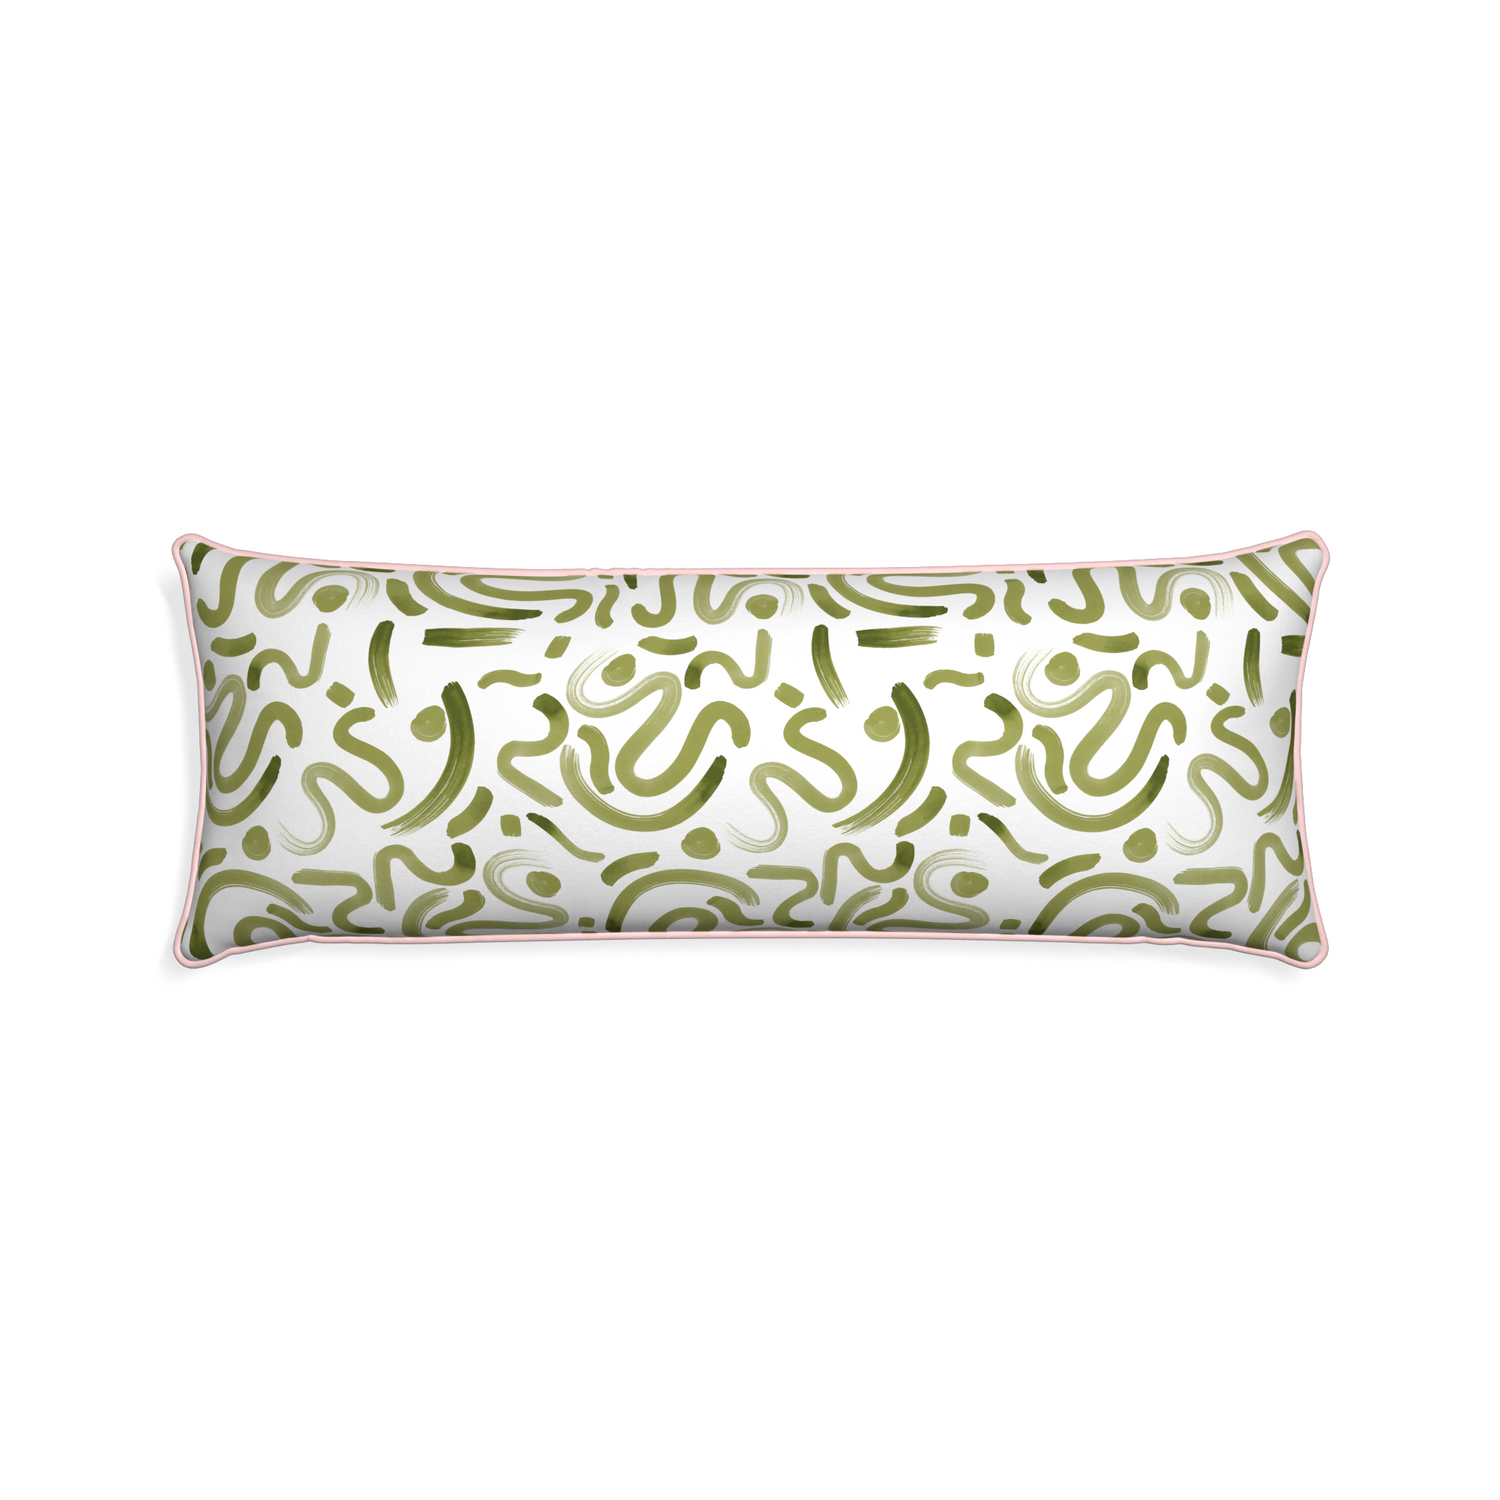 Xl-lumbar hockney moss custom pillow with petal piping on white background